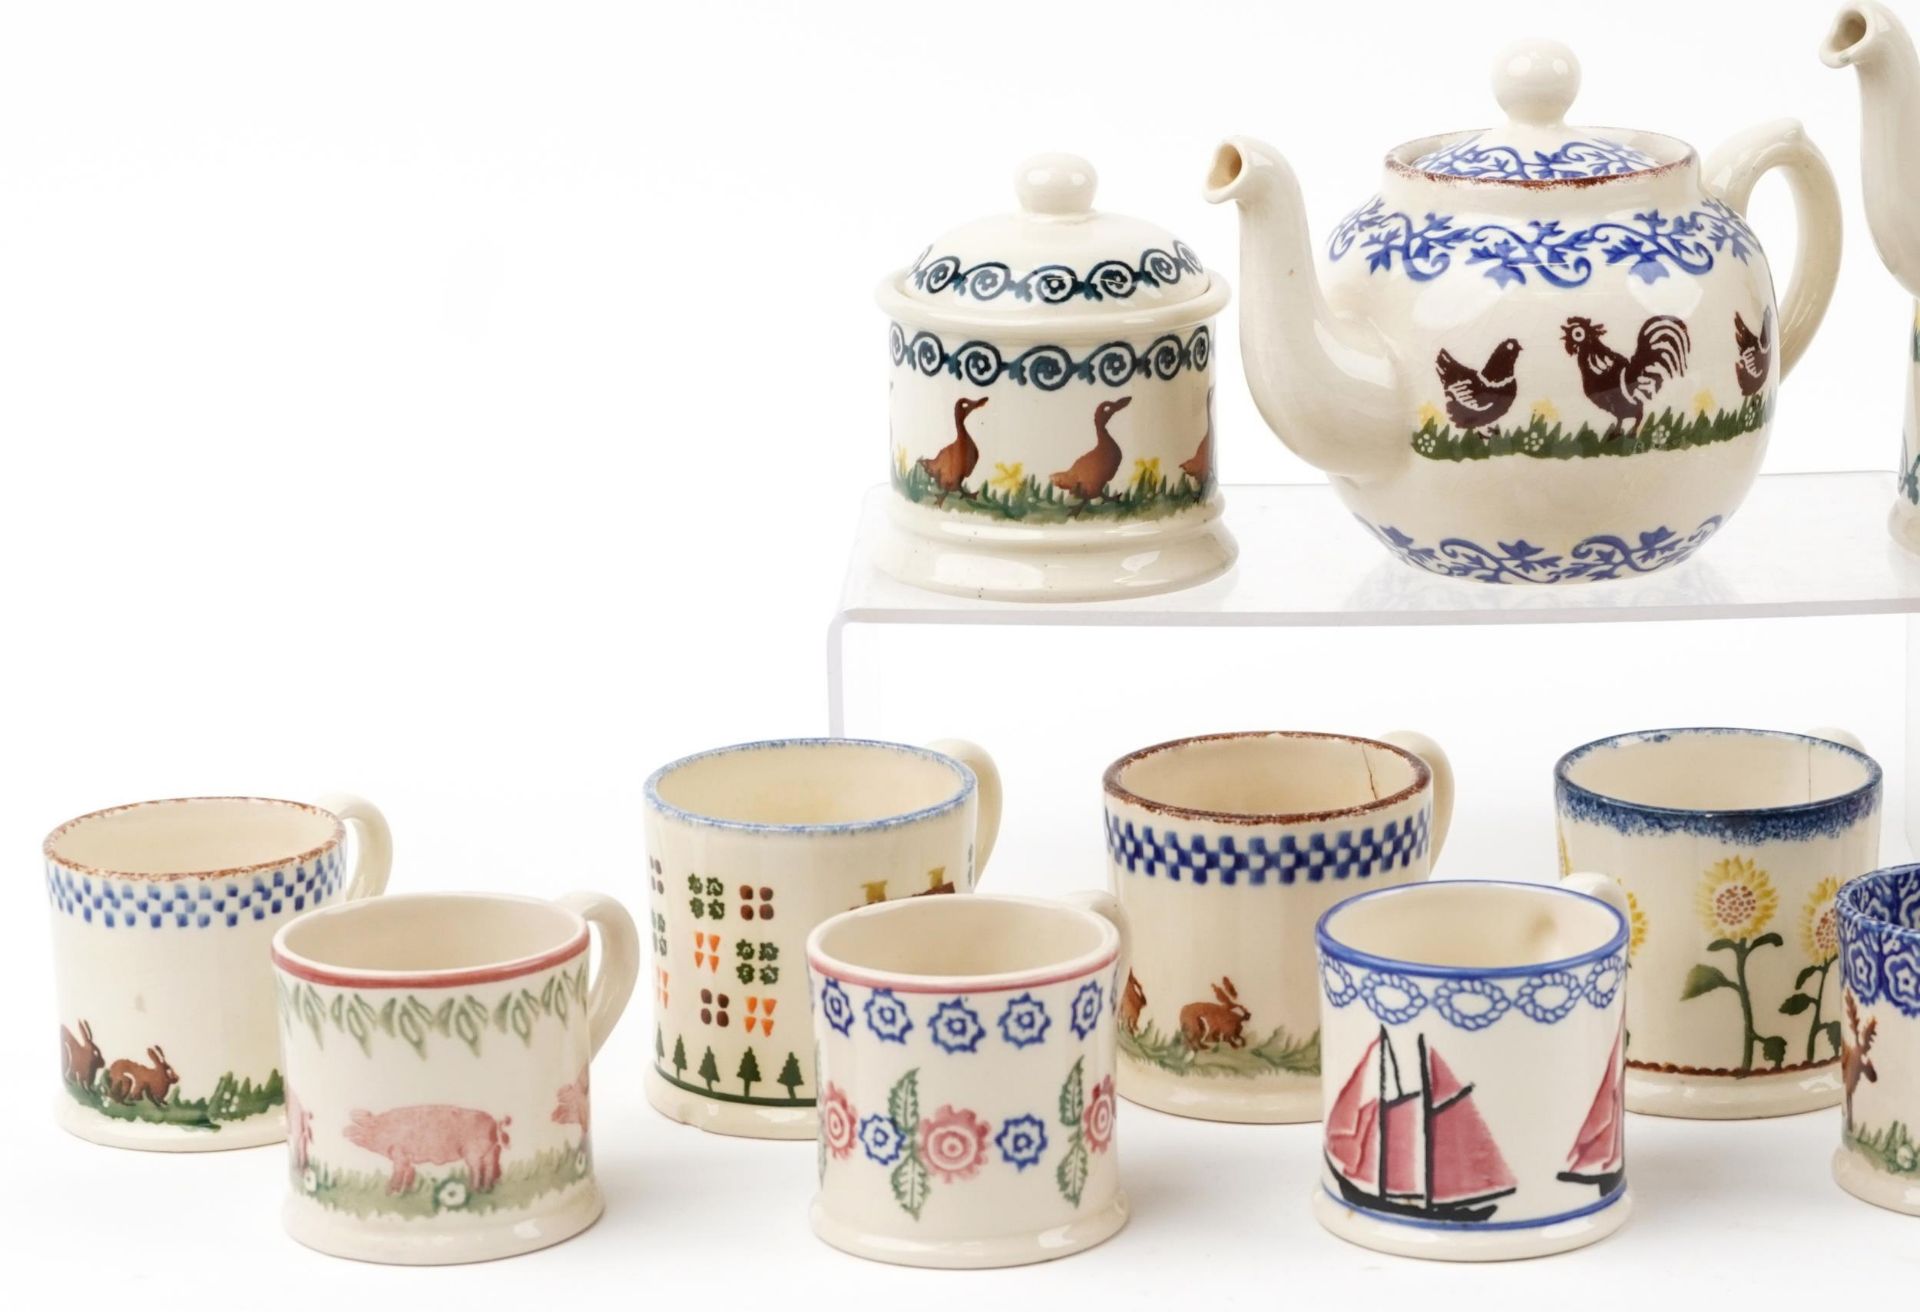 Brixton pottery hand painted with animals including mugs, storage jars and teapot, the largest 21. - Image 2 of 4